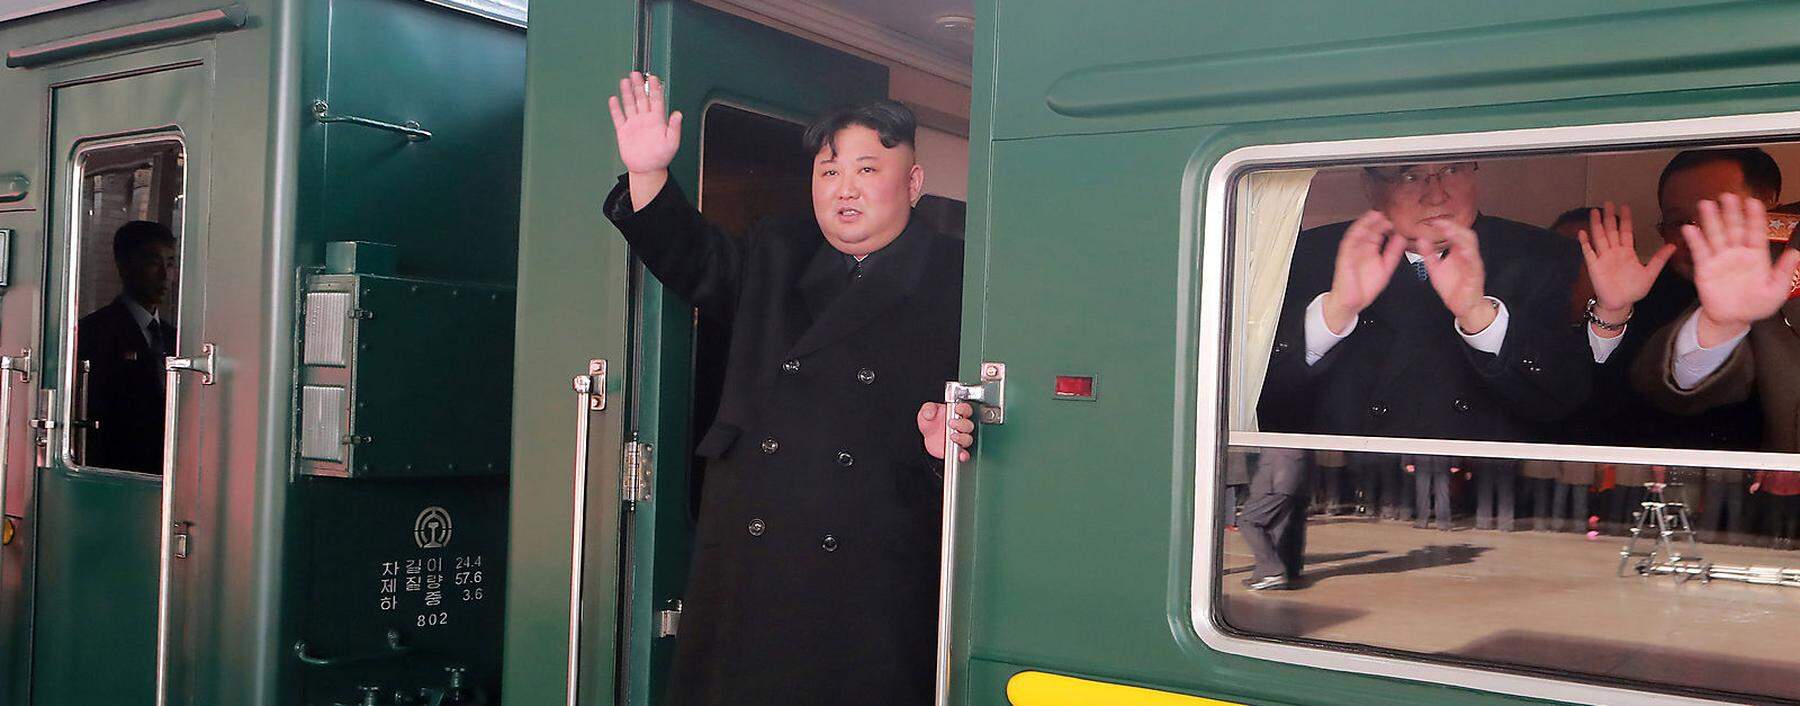 North Korean leader Kim Jong Un waves from a train as he departs for a summit in Hanoi